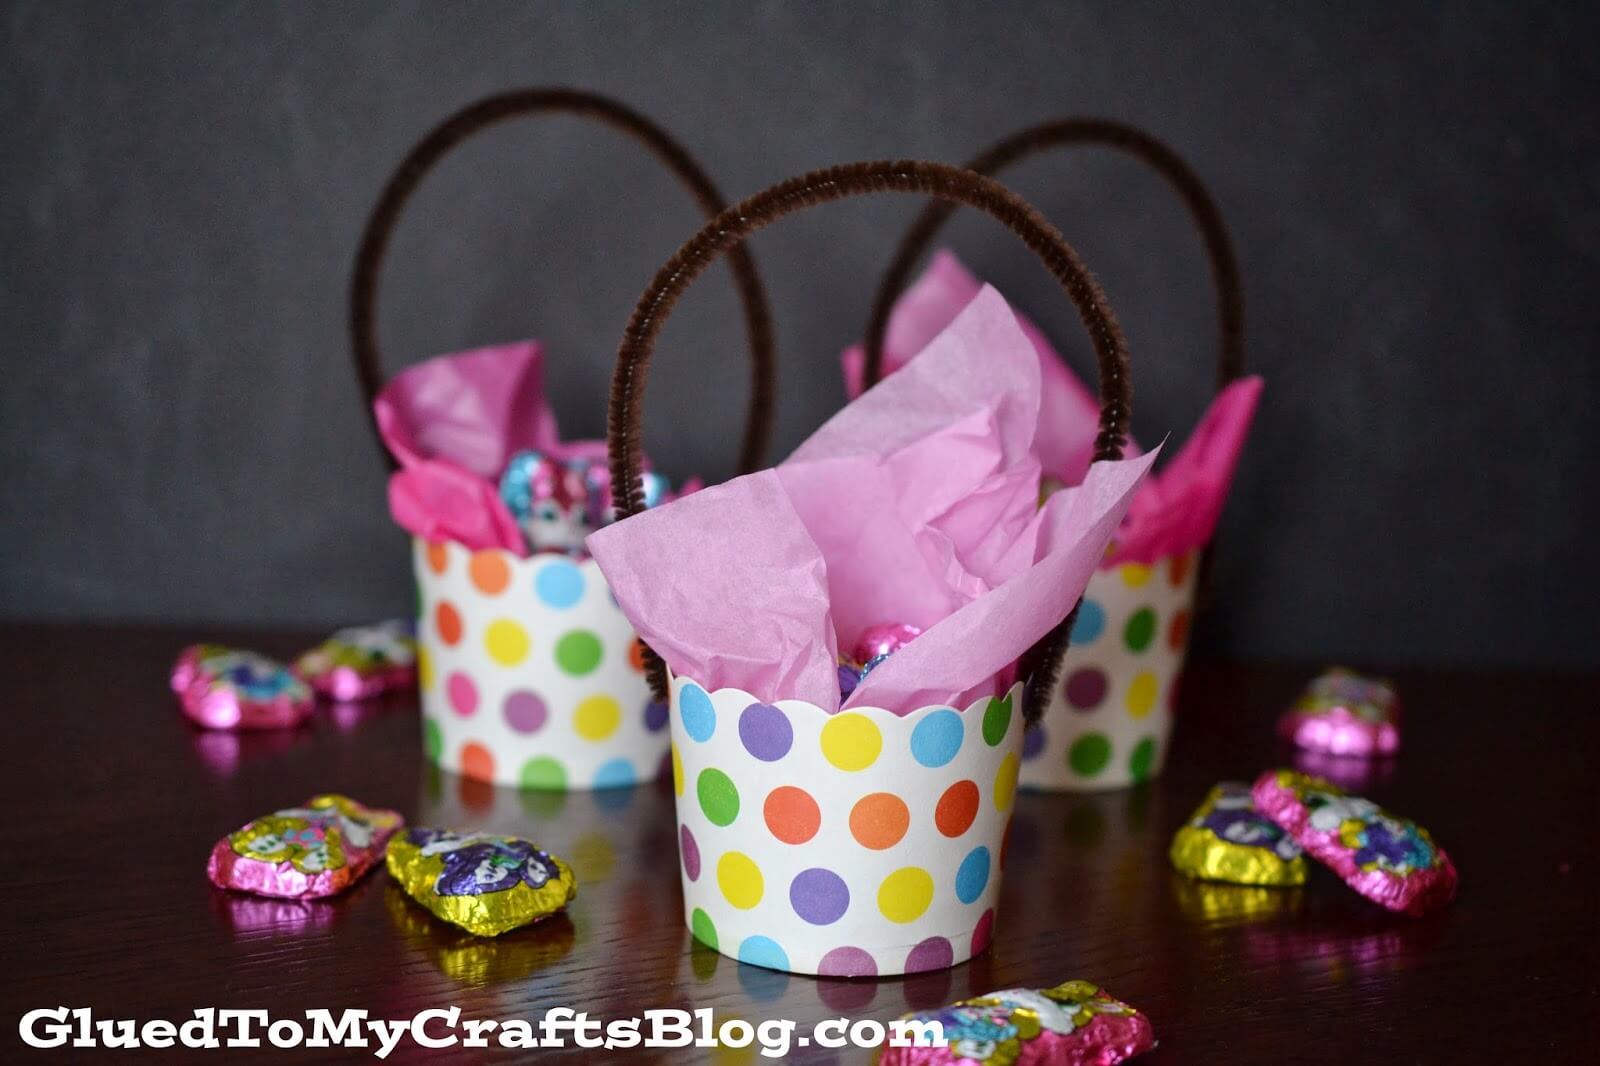 Mini Easter Basket Miniature Gift Crafts Using Recycled Paper Cup, Tissue Paper, Candies & Pipe Cleaners - Compact Crafting with Paper Cups